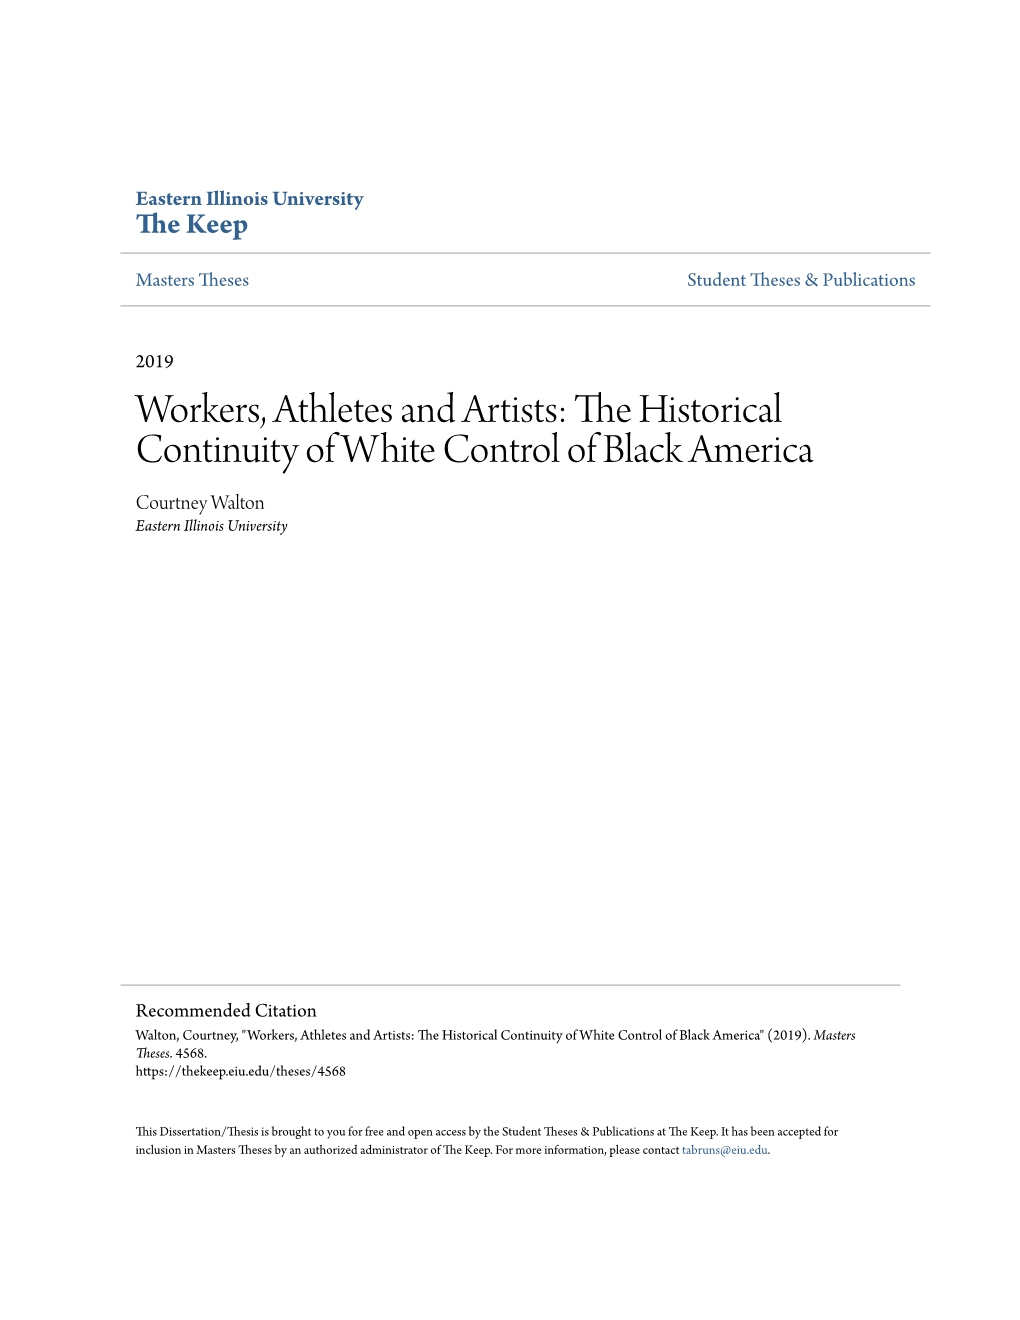 The Historical Continuity of White Control of Black America